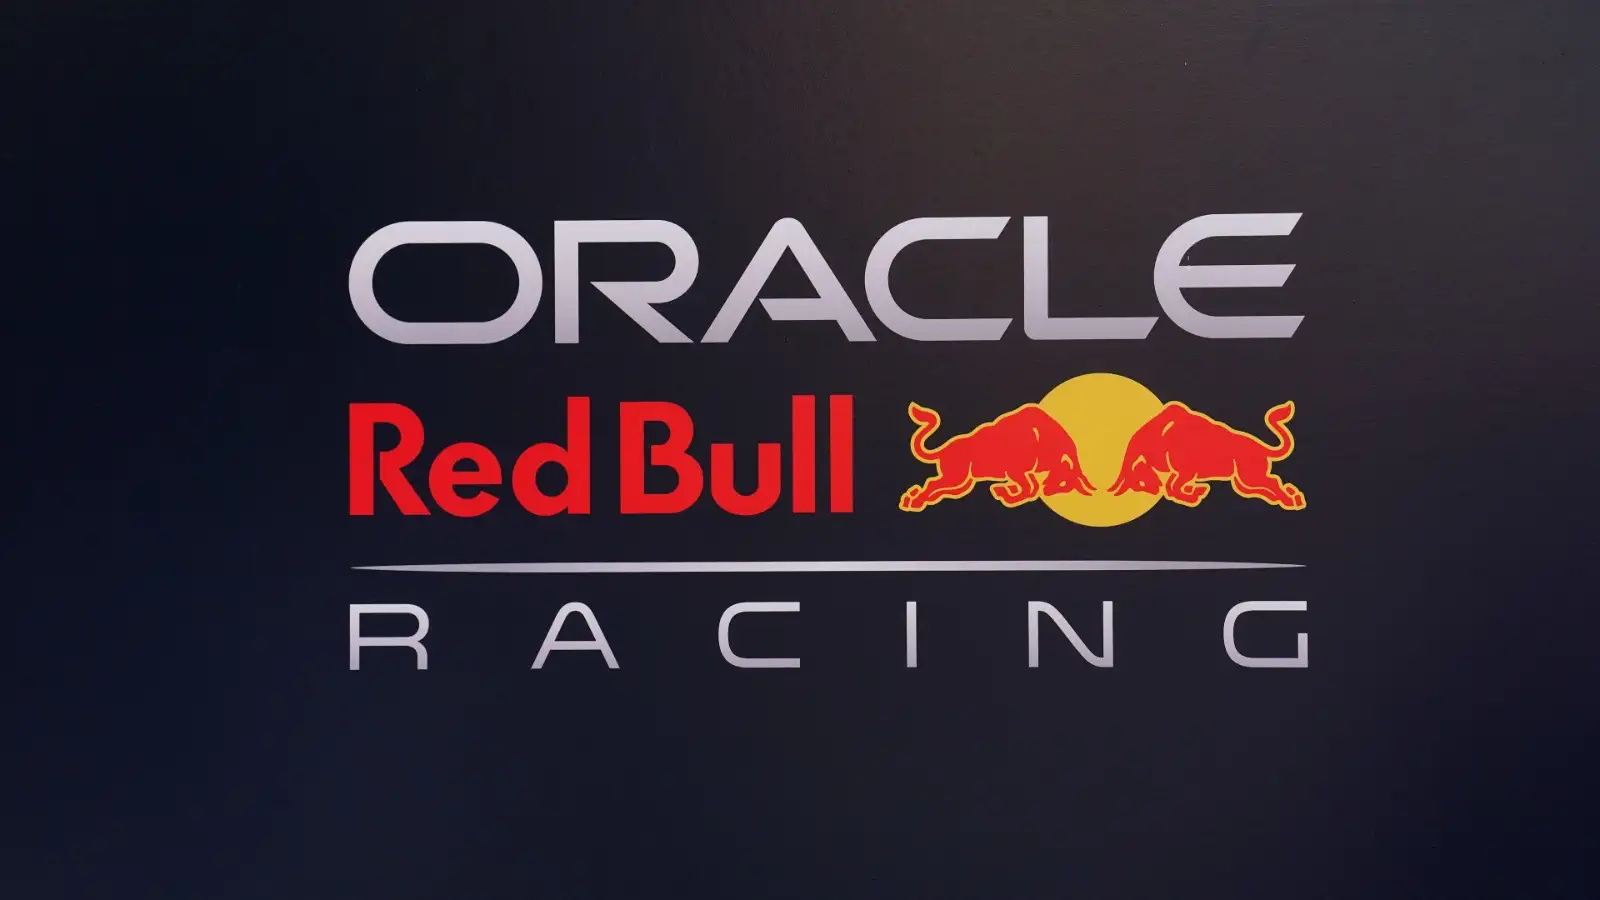 The Oracle Red Bull Racing logo on display at the Singapore Grand Prix